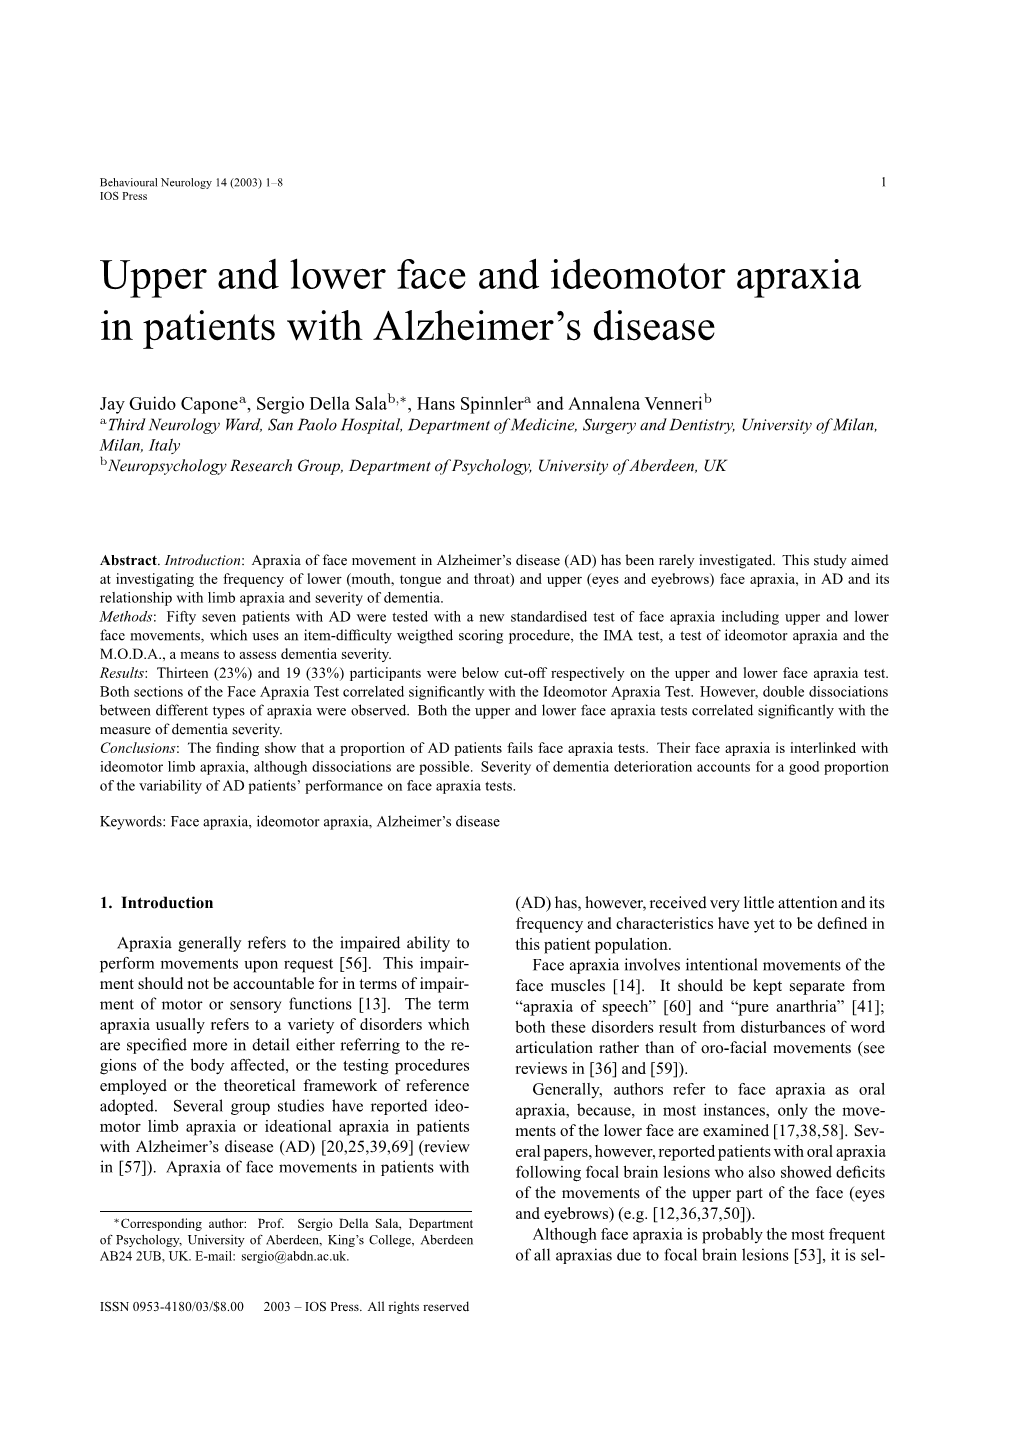 Upper and Lower Face and Ideomotor Apraxia in Patients with Alzheimer's